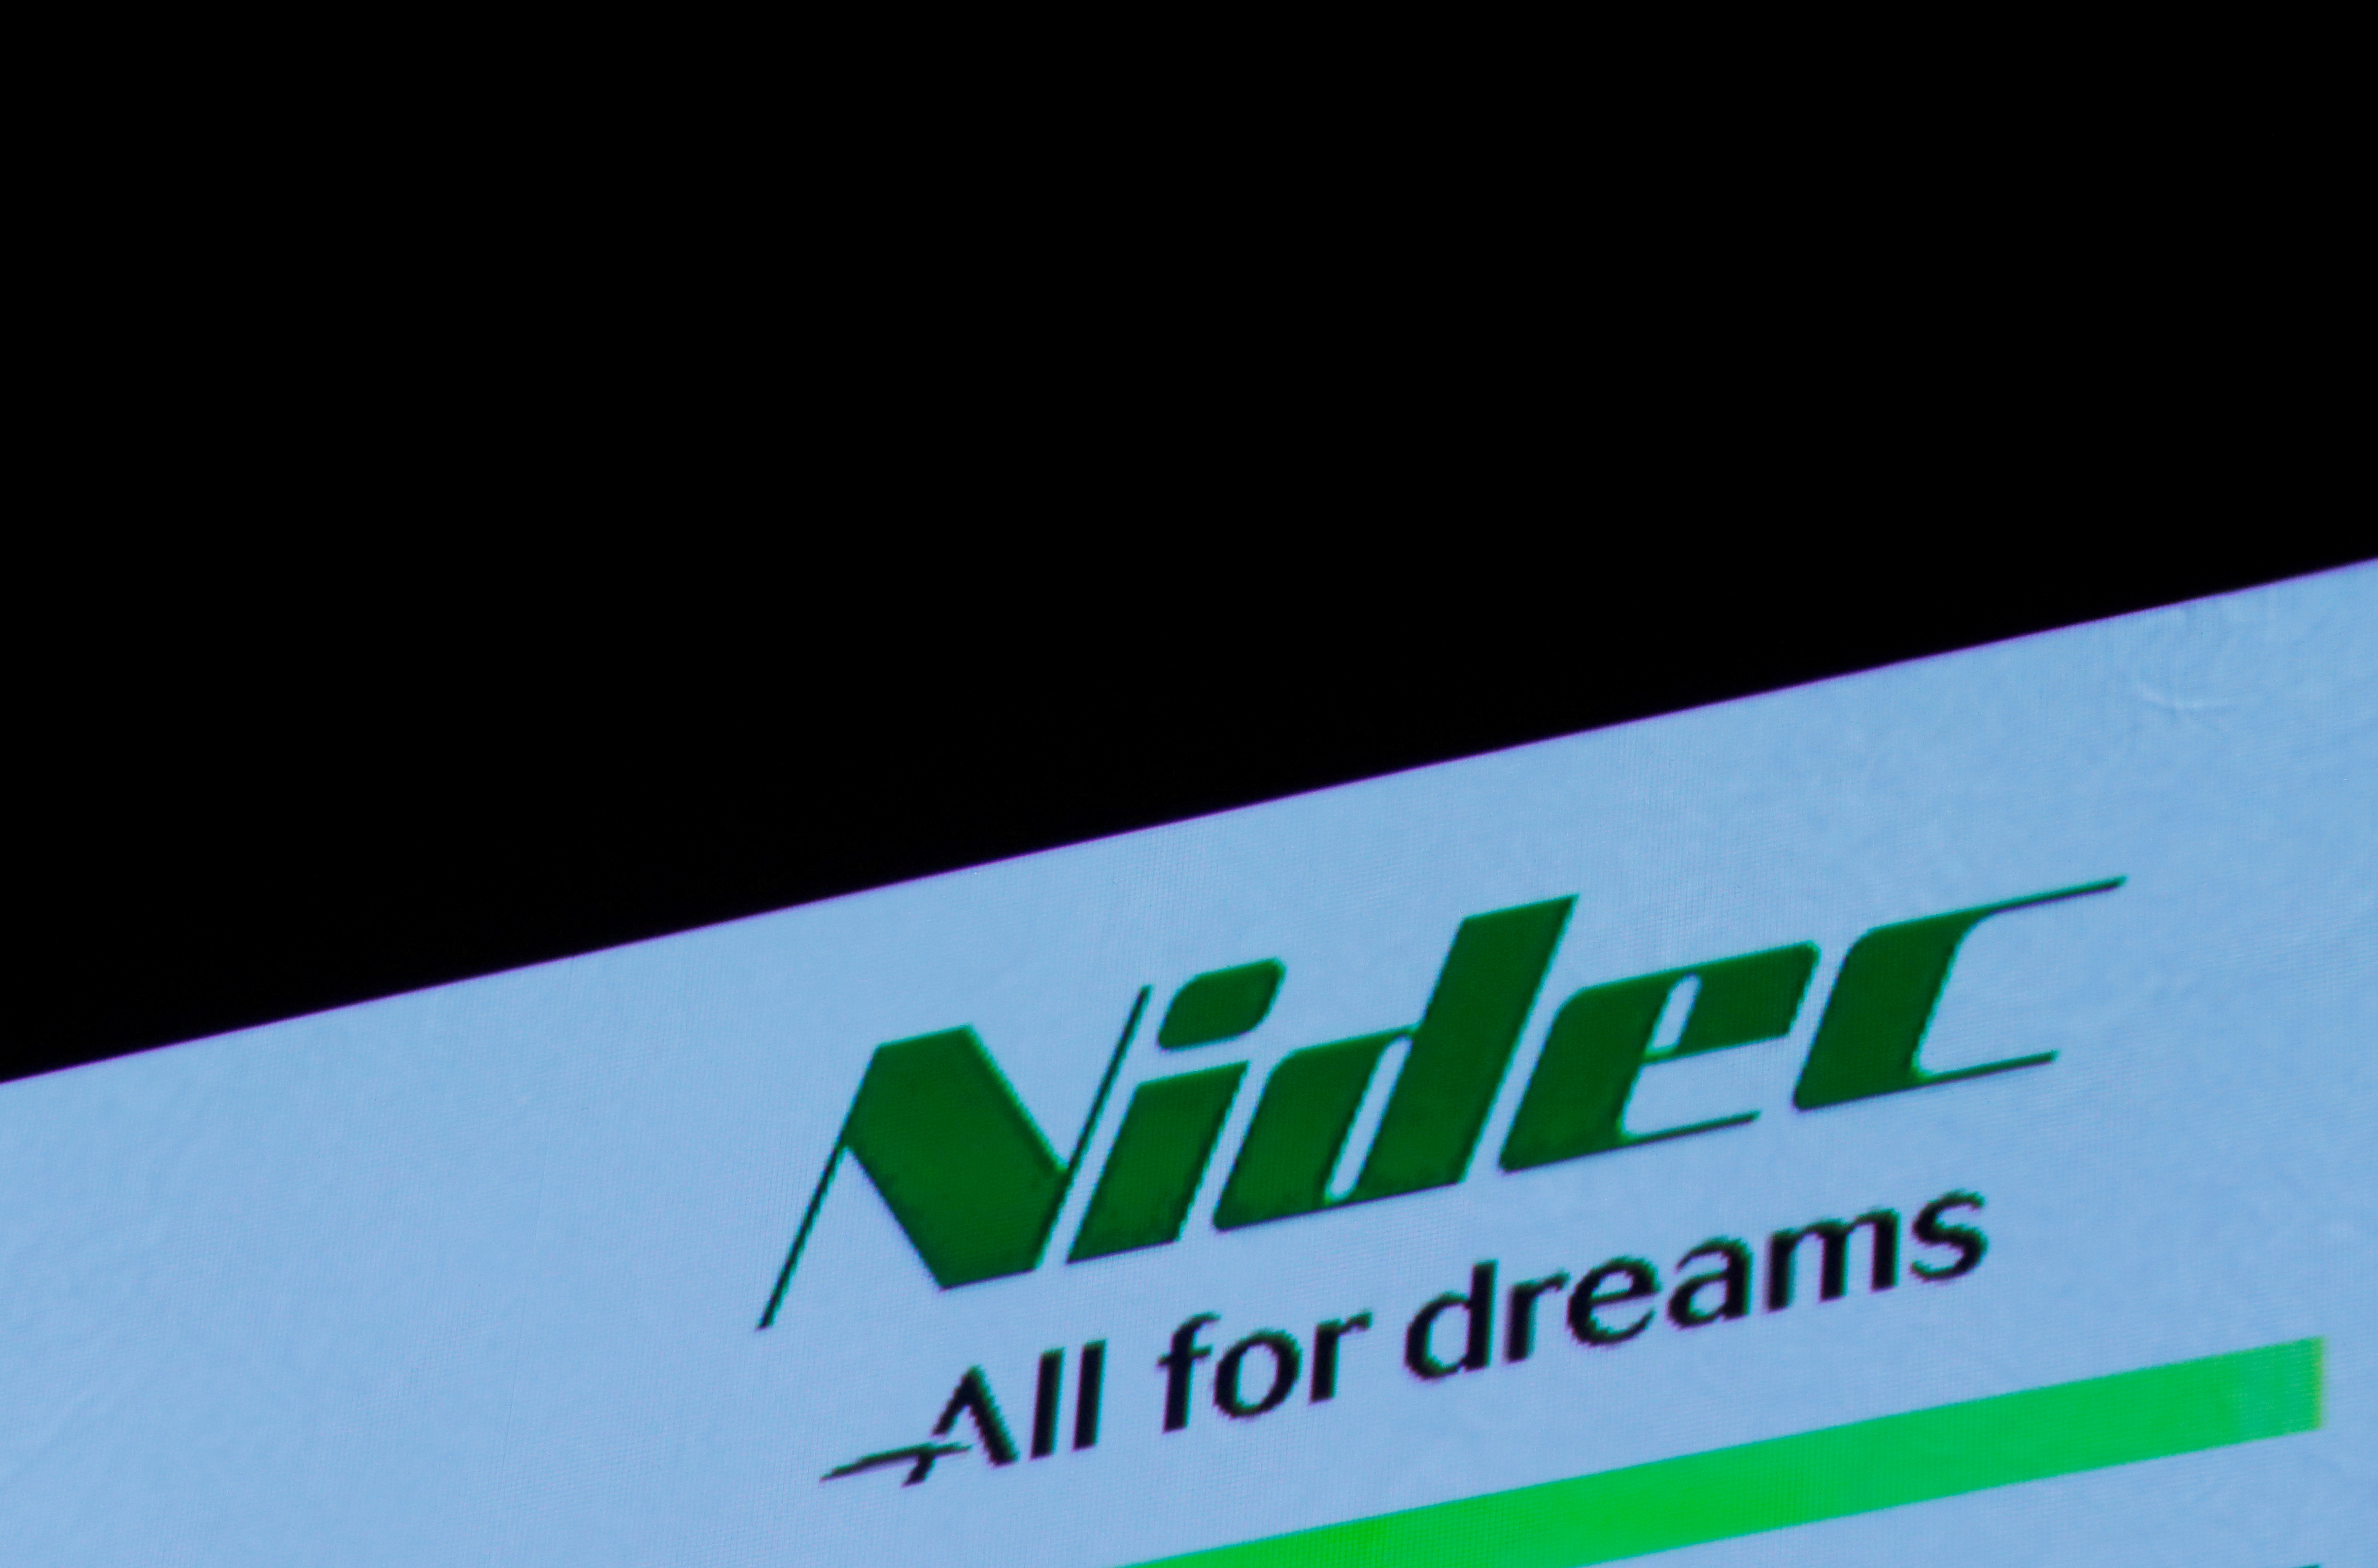 Nidec Corp's logo is pictured at an earnings results news conference in Tokyo